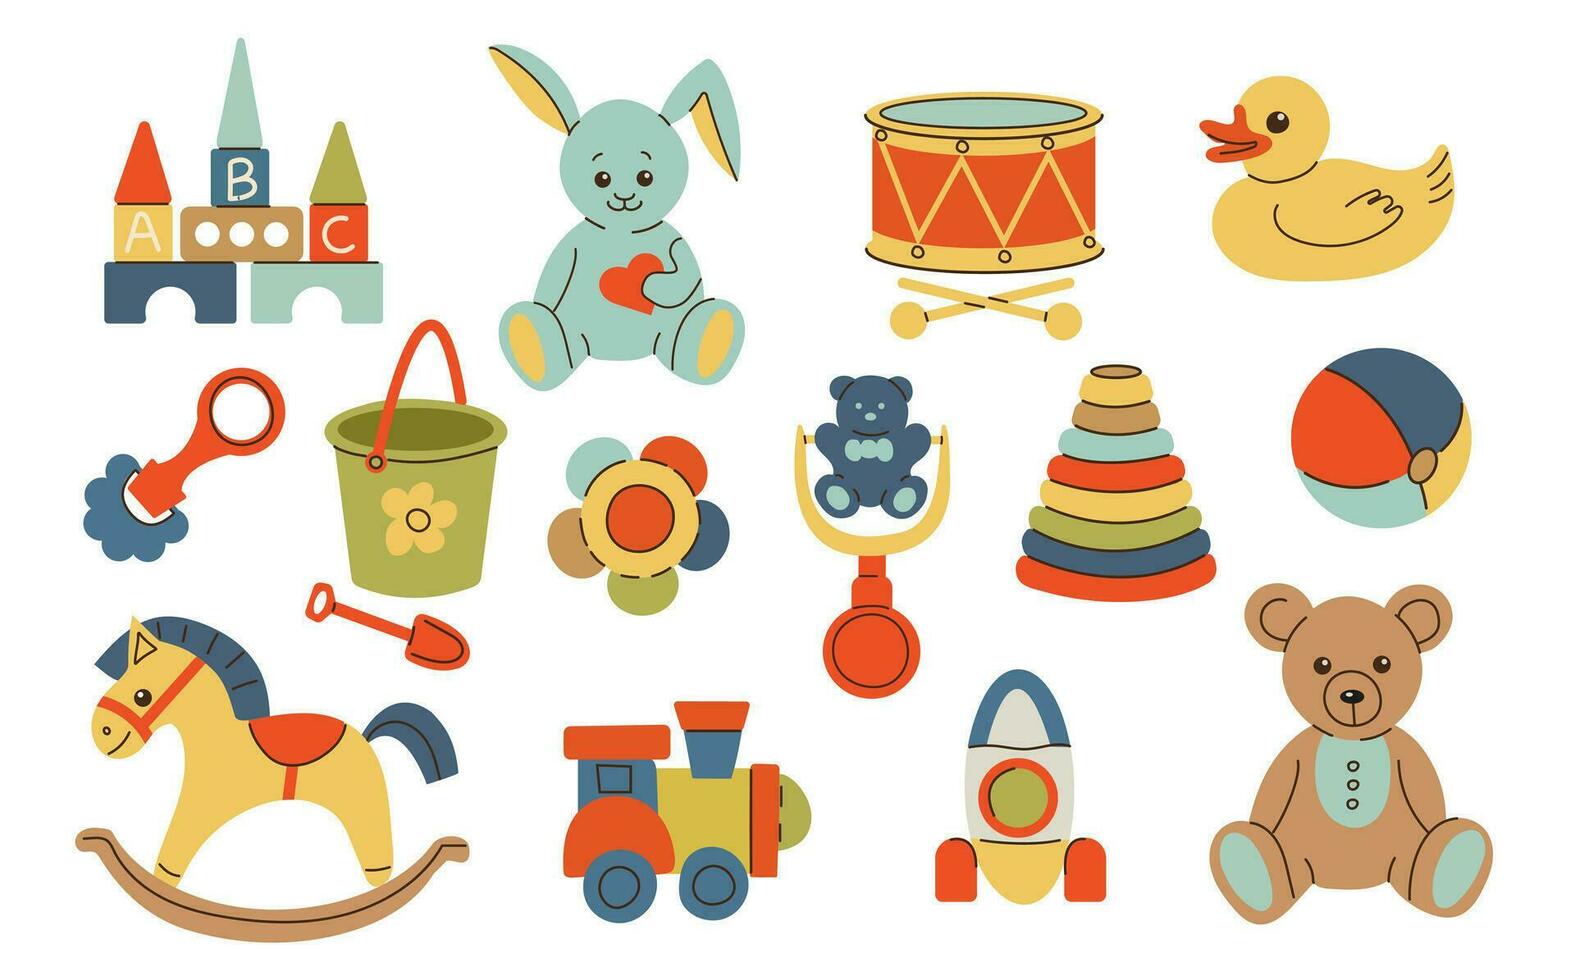 Various isolated toys for kids. Ball, drum, wooden train, bunny, rocking horse, teddy bear, toy blocks, rattles. Childhood, children games, preschool activities concept. Hand drawn vector set.